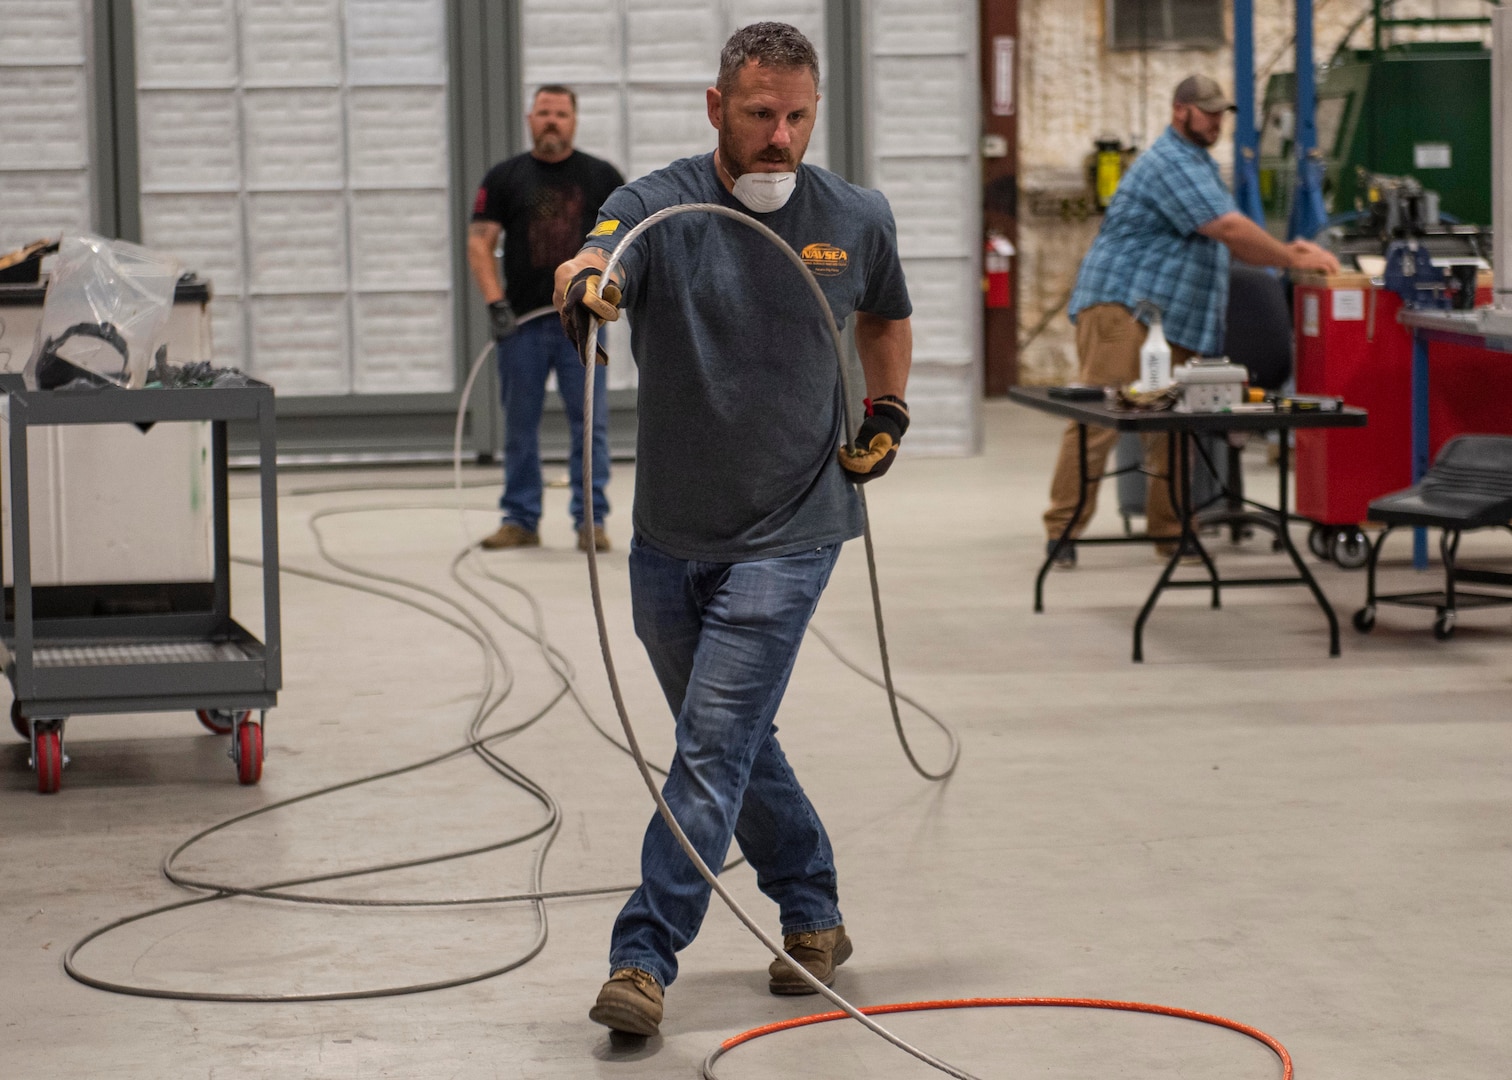 John Jacobs (front) and Cory Appling (back), mechanical and fiber optic technicians, prepare a Sensor Deployment Cable for installation on Carriage, Stream, Tow, and Recovery System (CSTRS) at the CSTRS Depot May 5.